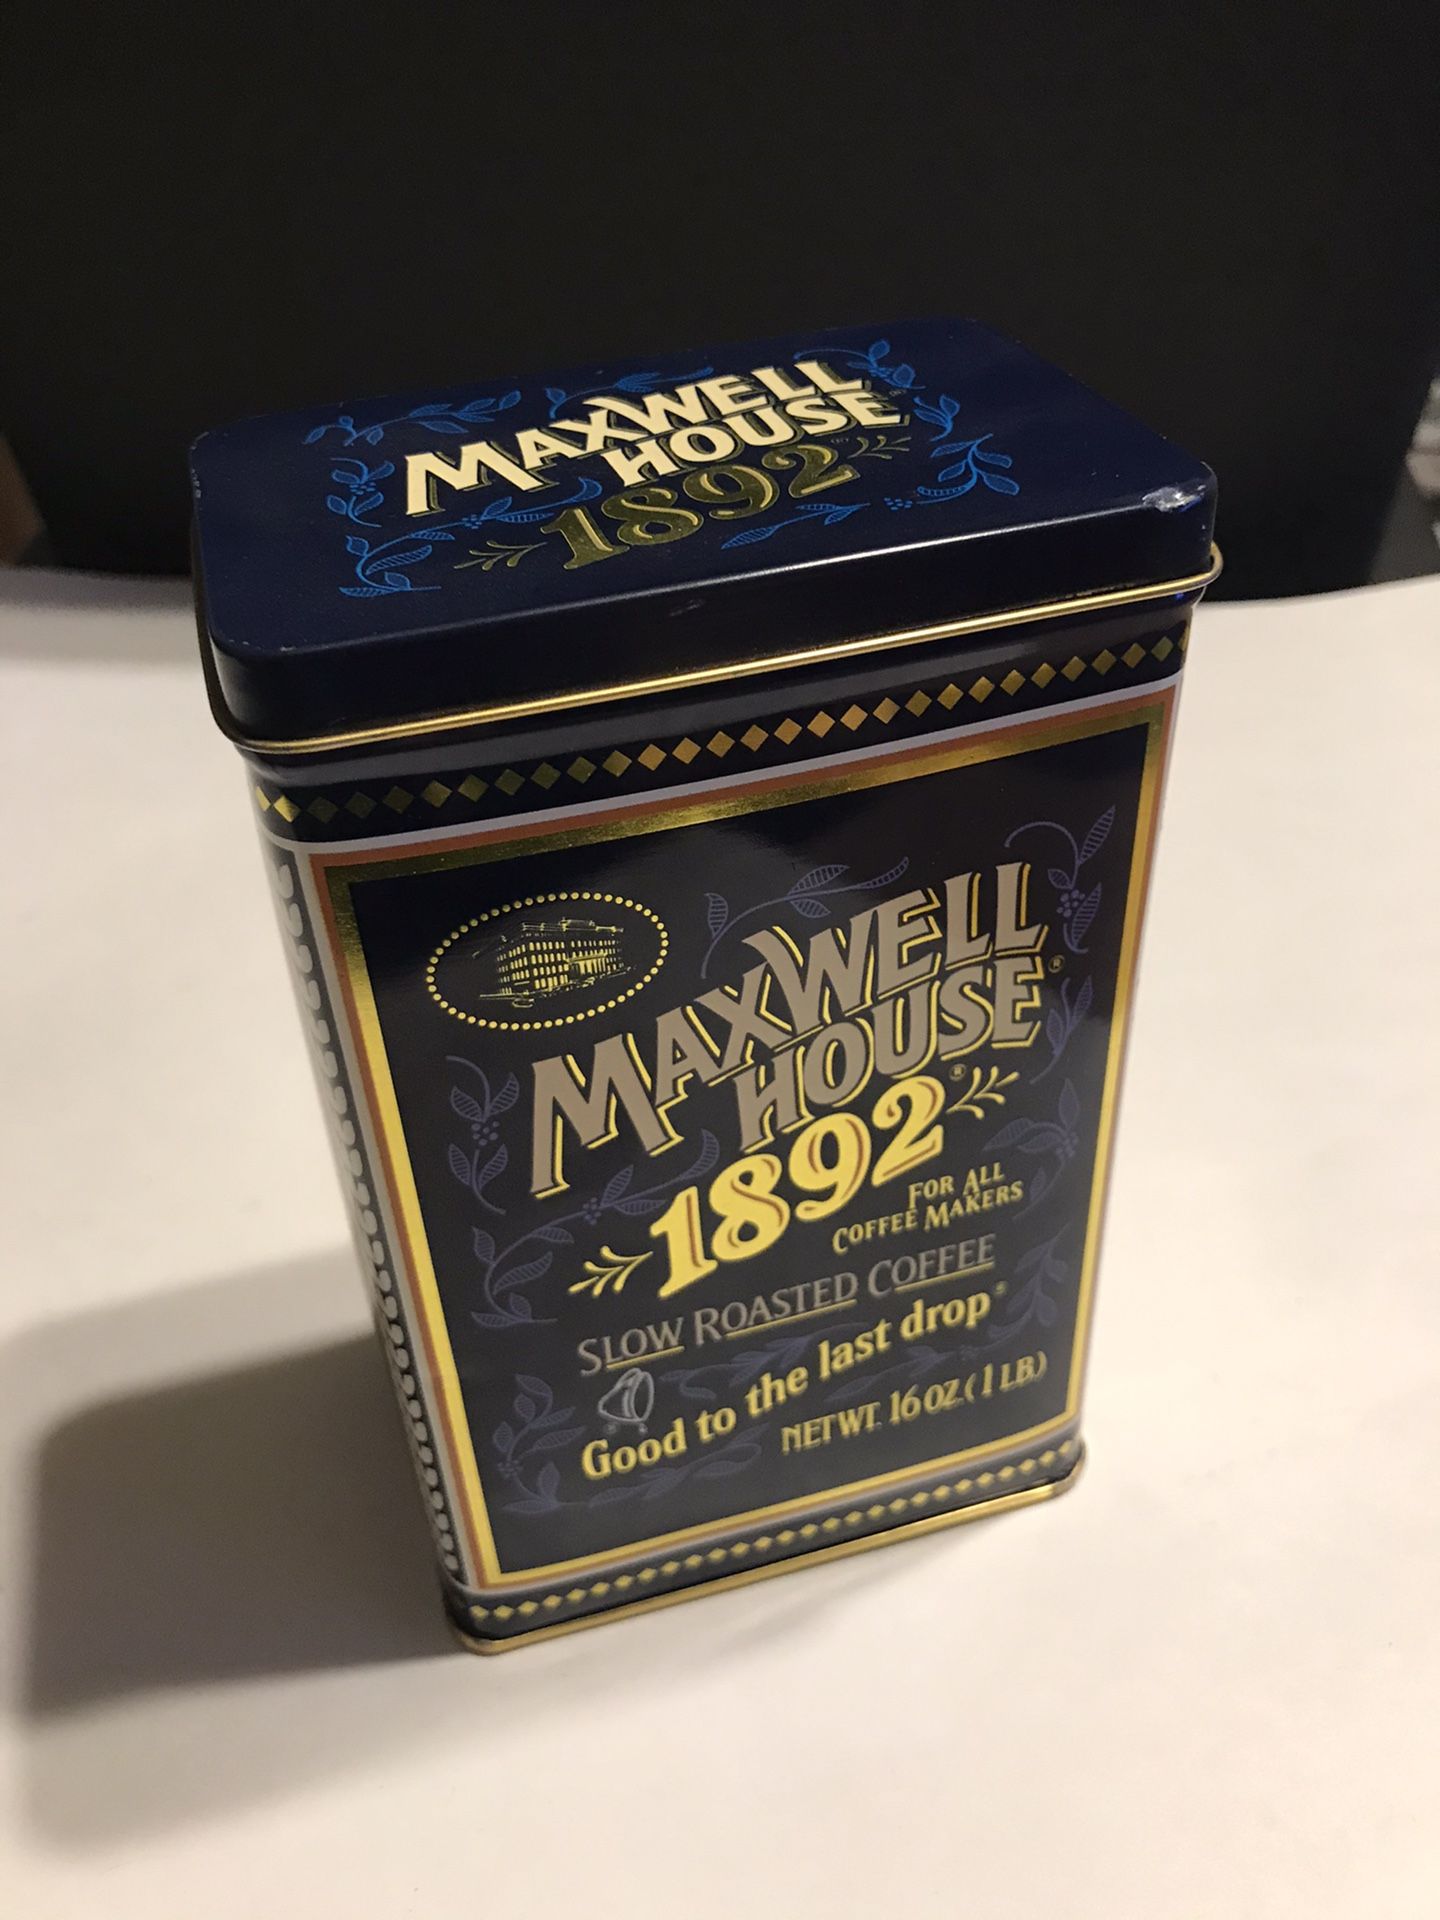 Vintage 100 Year Anniversary Maxwell House 1892 Slow Roasted Coffee Metal Tin